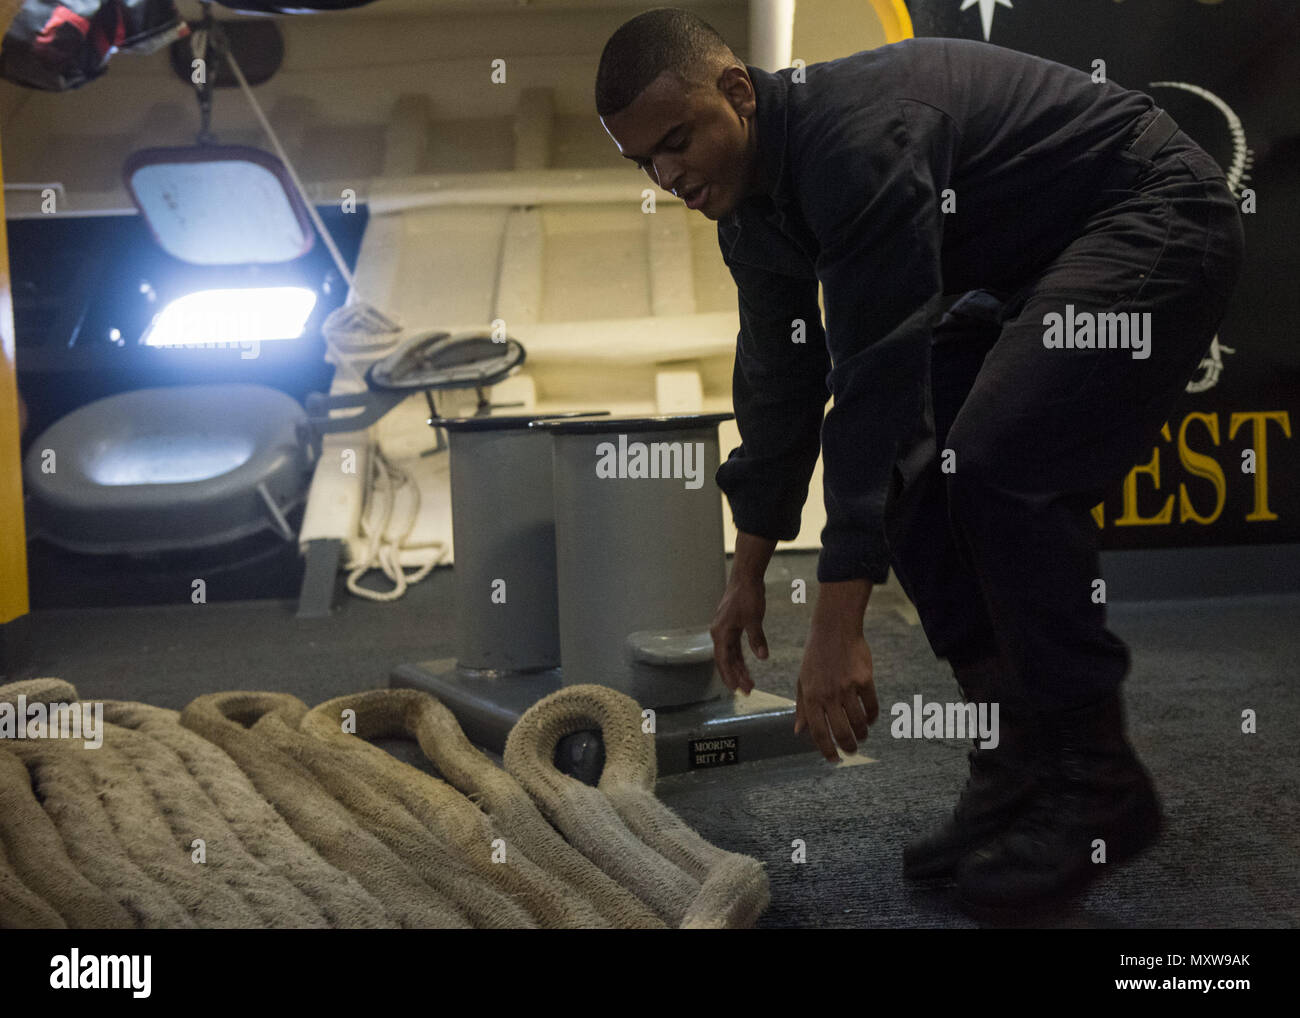 161208-N-BR551-066 PACIFIC OCEAN (Dec. 8, 2016) Seaman Jordan Cueto, from the Bronx, New York, fakes mooring line in USS John C. Stennis' (CVN 74) forecastle as the ship gets underway from Joint Base Pearl Harbor-Hickam. John C. Stennis is underway to conduct routine training after participating in National Pearl Harbor Remembrance Day events in Hawaii. (U.S. Navy photo by Petty Officer 3rd Class Dakota Rayburn / Released) Stock Photo